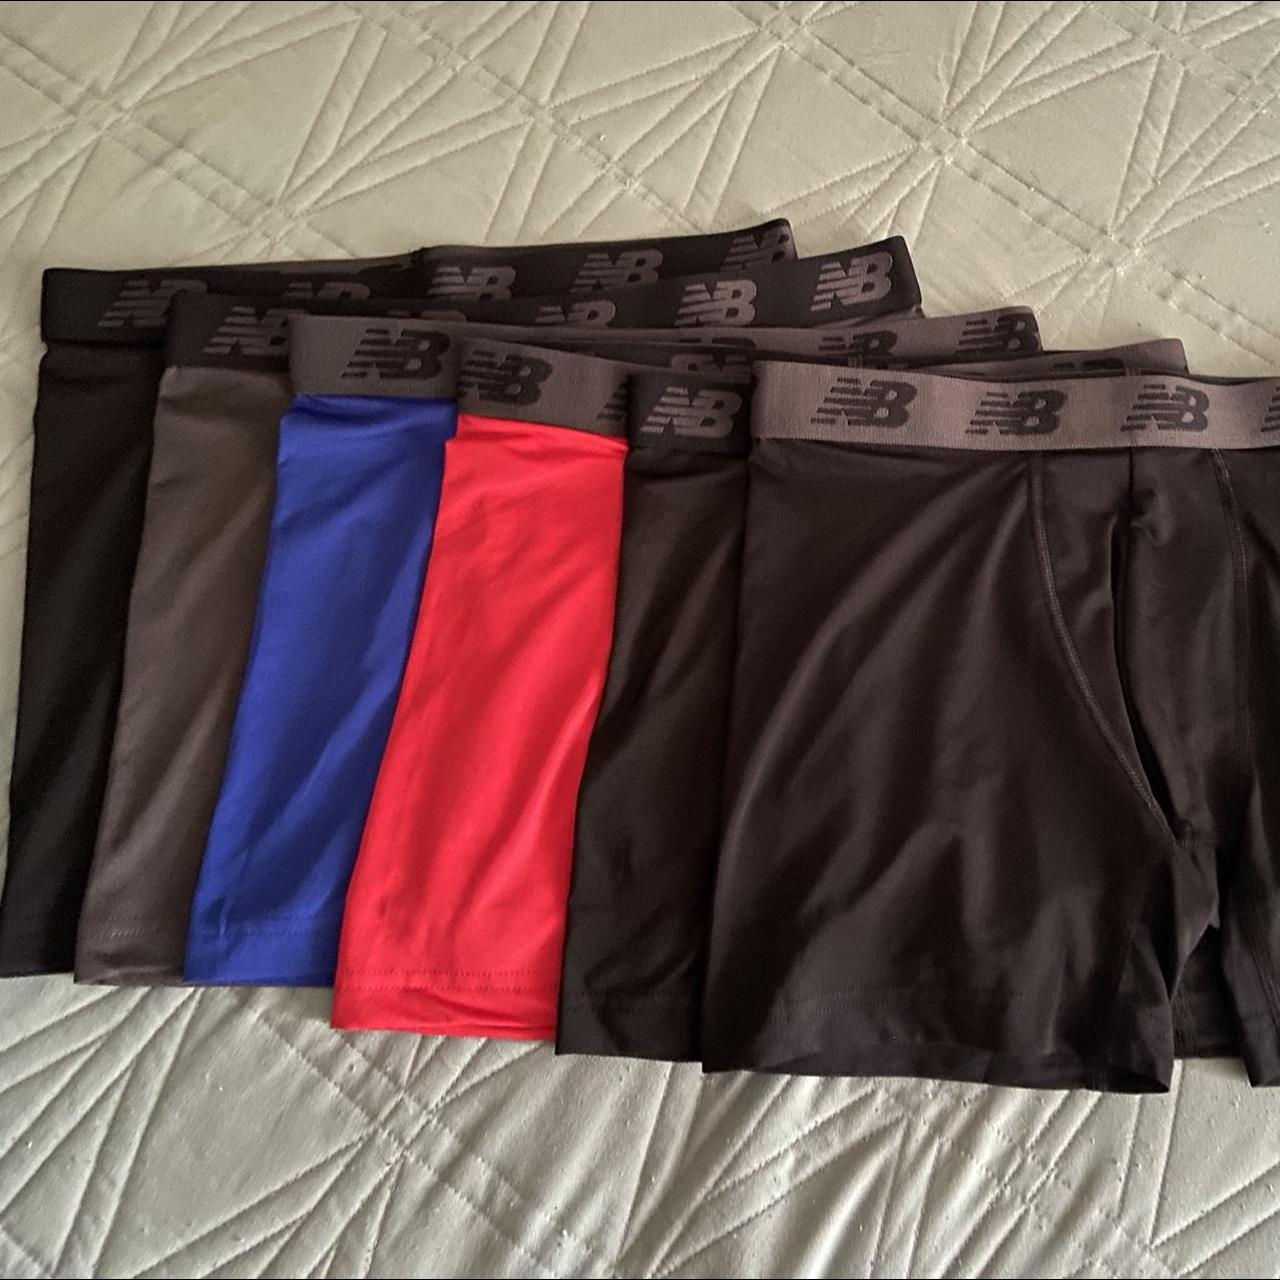 Secondhand pants, anyone?, Underwear for men